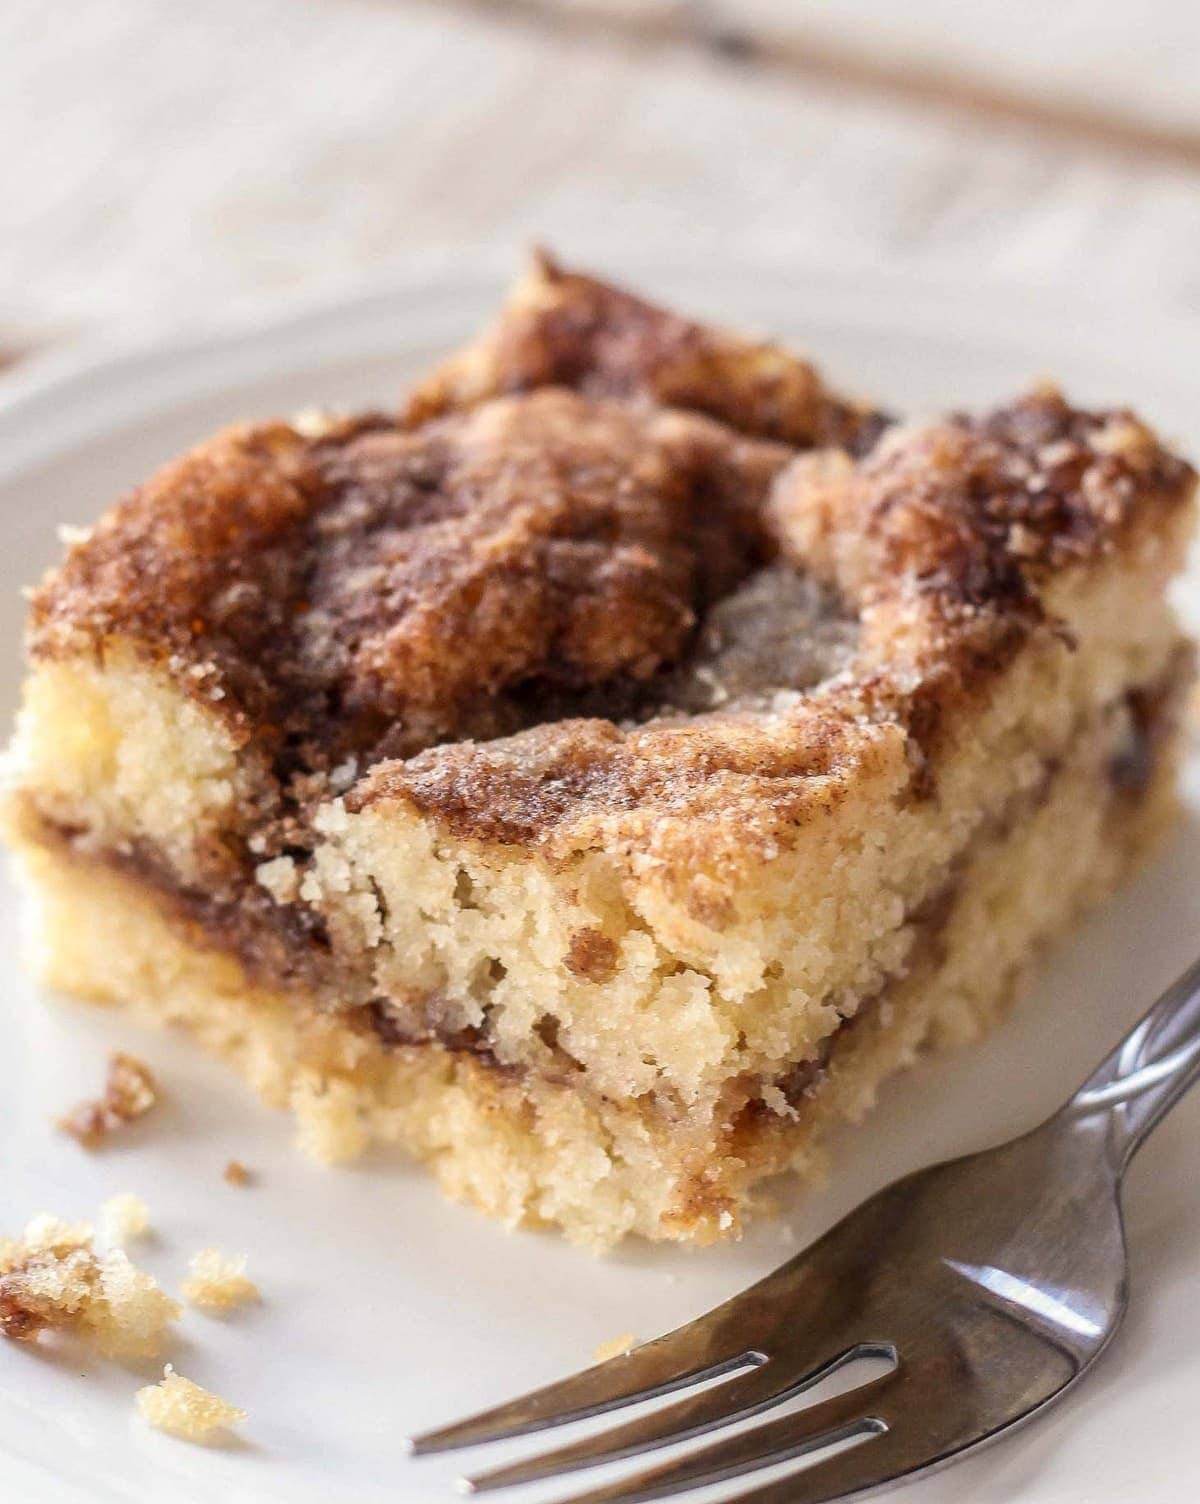 A square of crumbly homemade coffee cake served on a white plate.